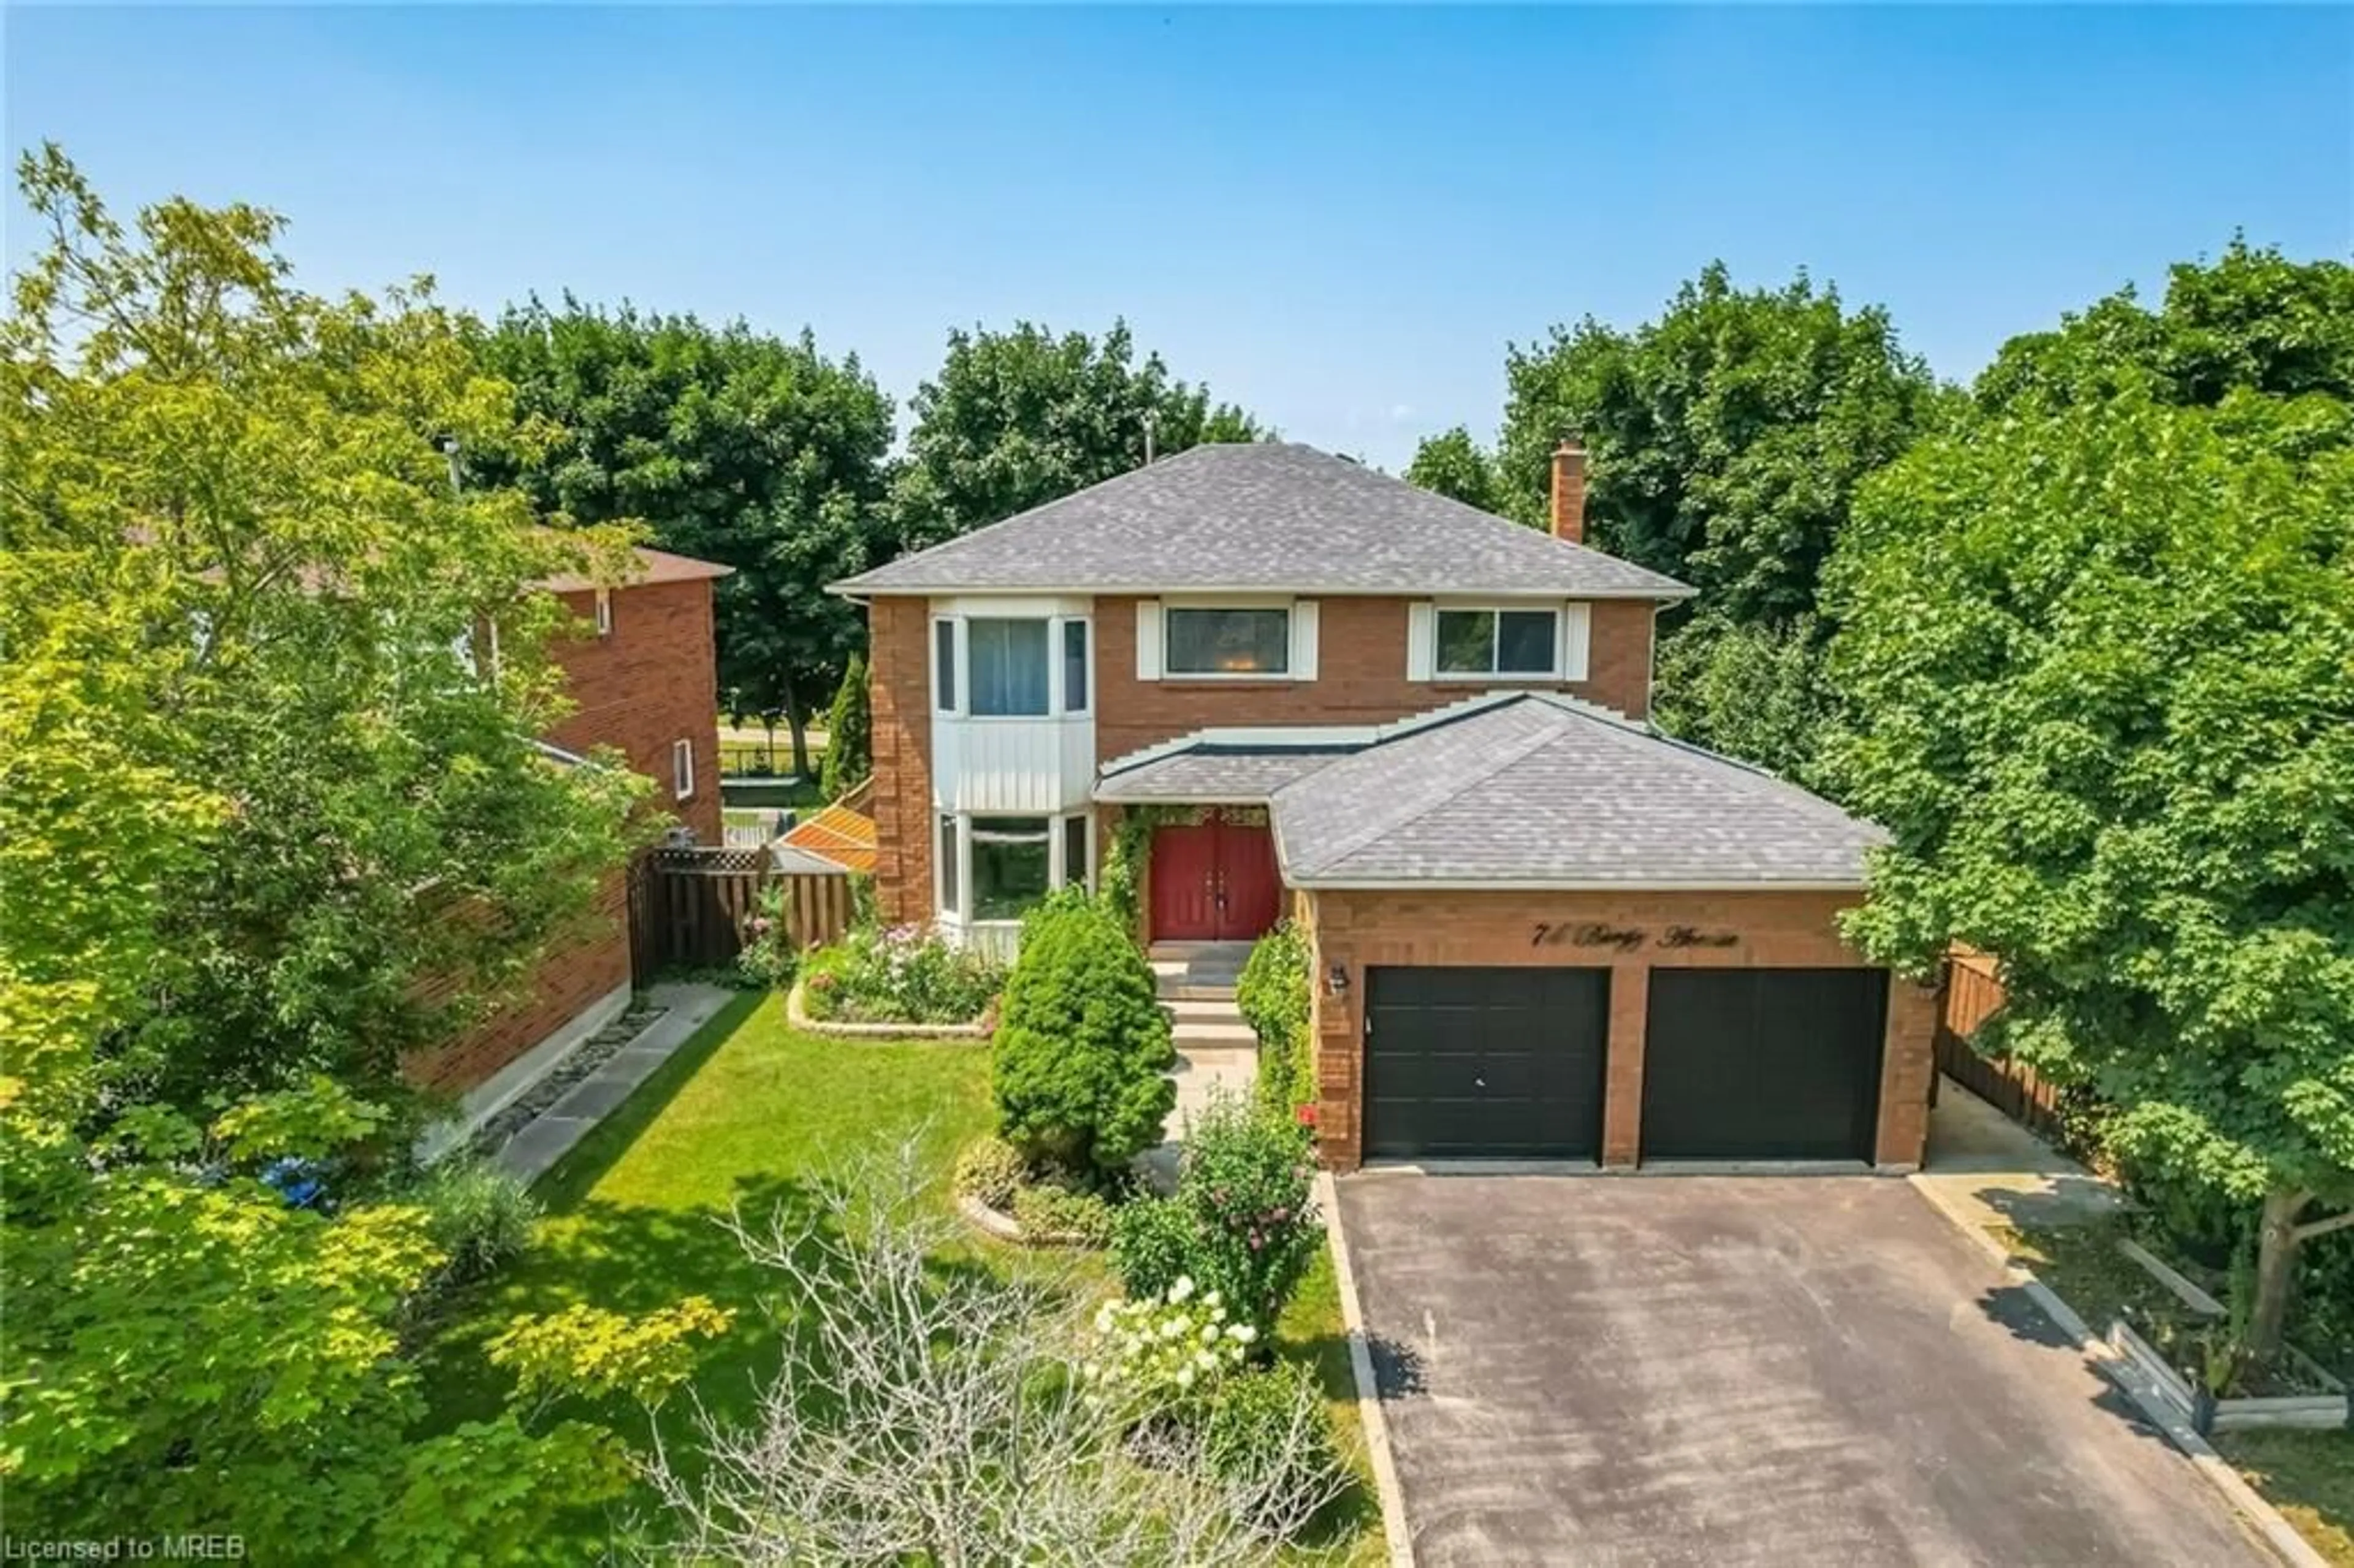 Home with brick exterior material for 74 Burgby Ave, Peel Ontario L6X 3A4